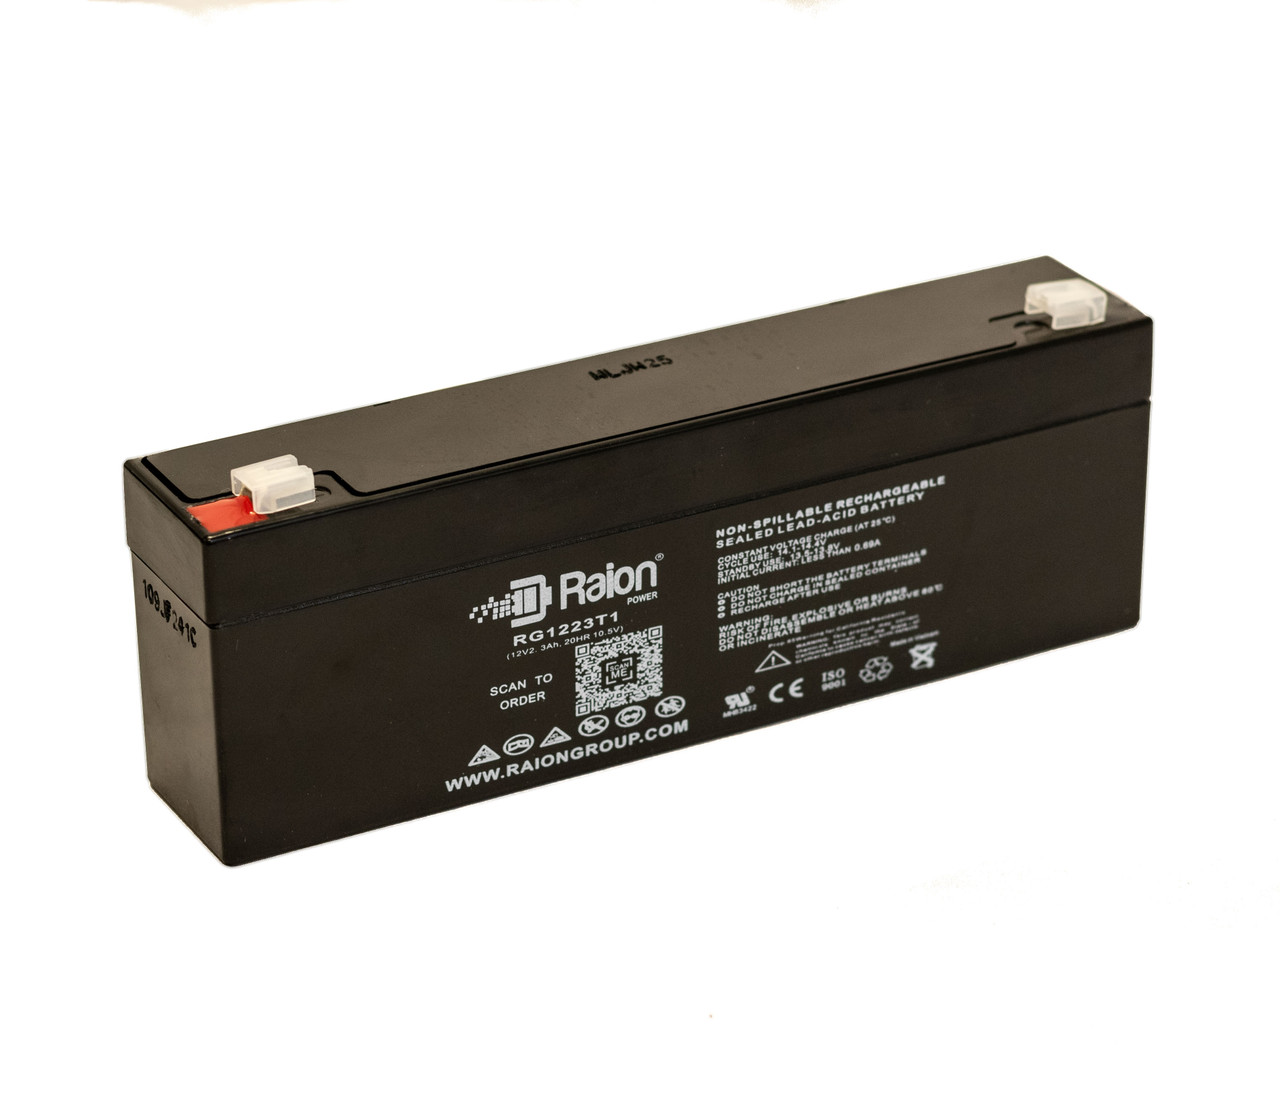 Raion Power RG1223T1 Replacement Battery for Ohio Medical Products BIOX IVA 3740 Oximeter